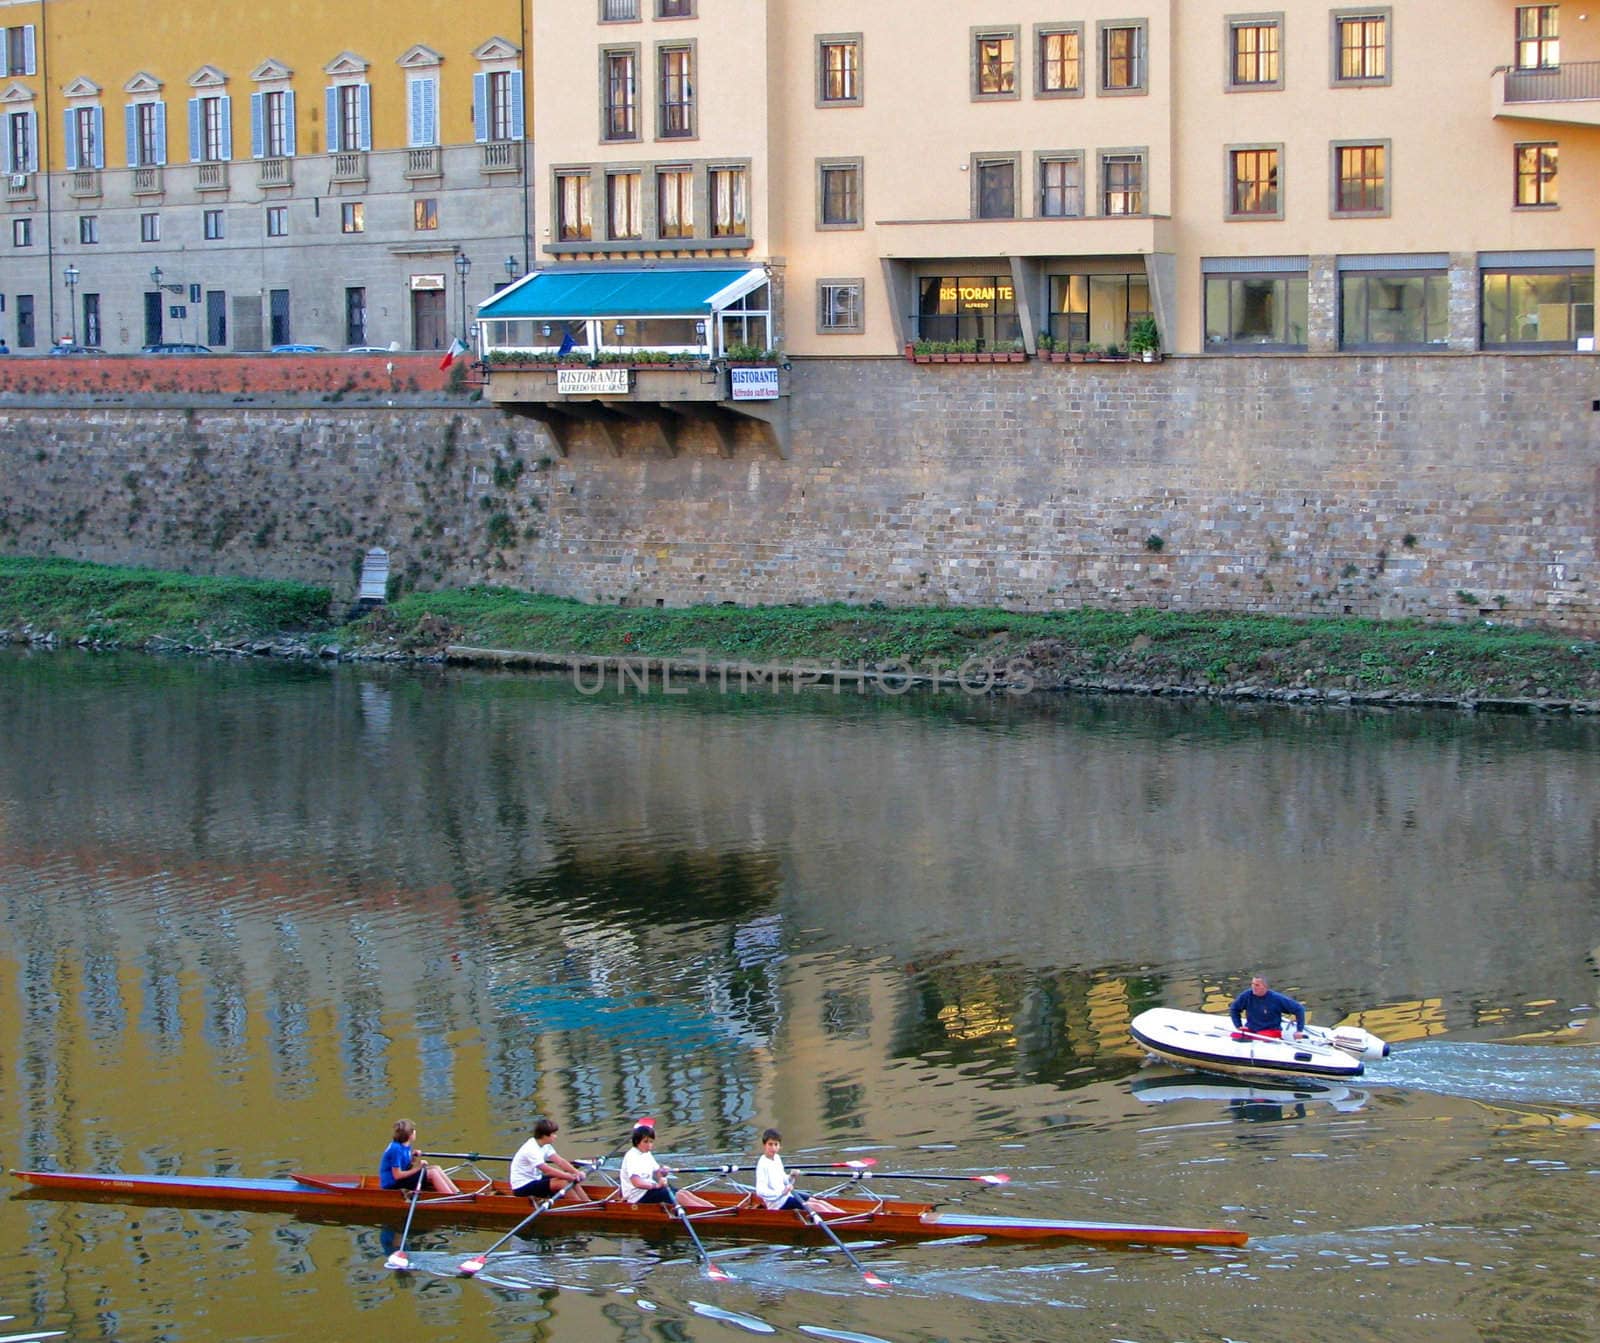 A rowing team practices on the Arno River in Florence, Italy.